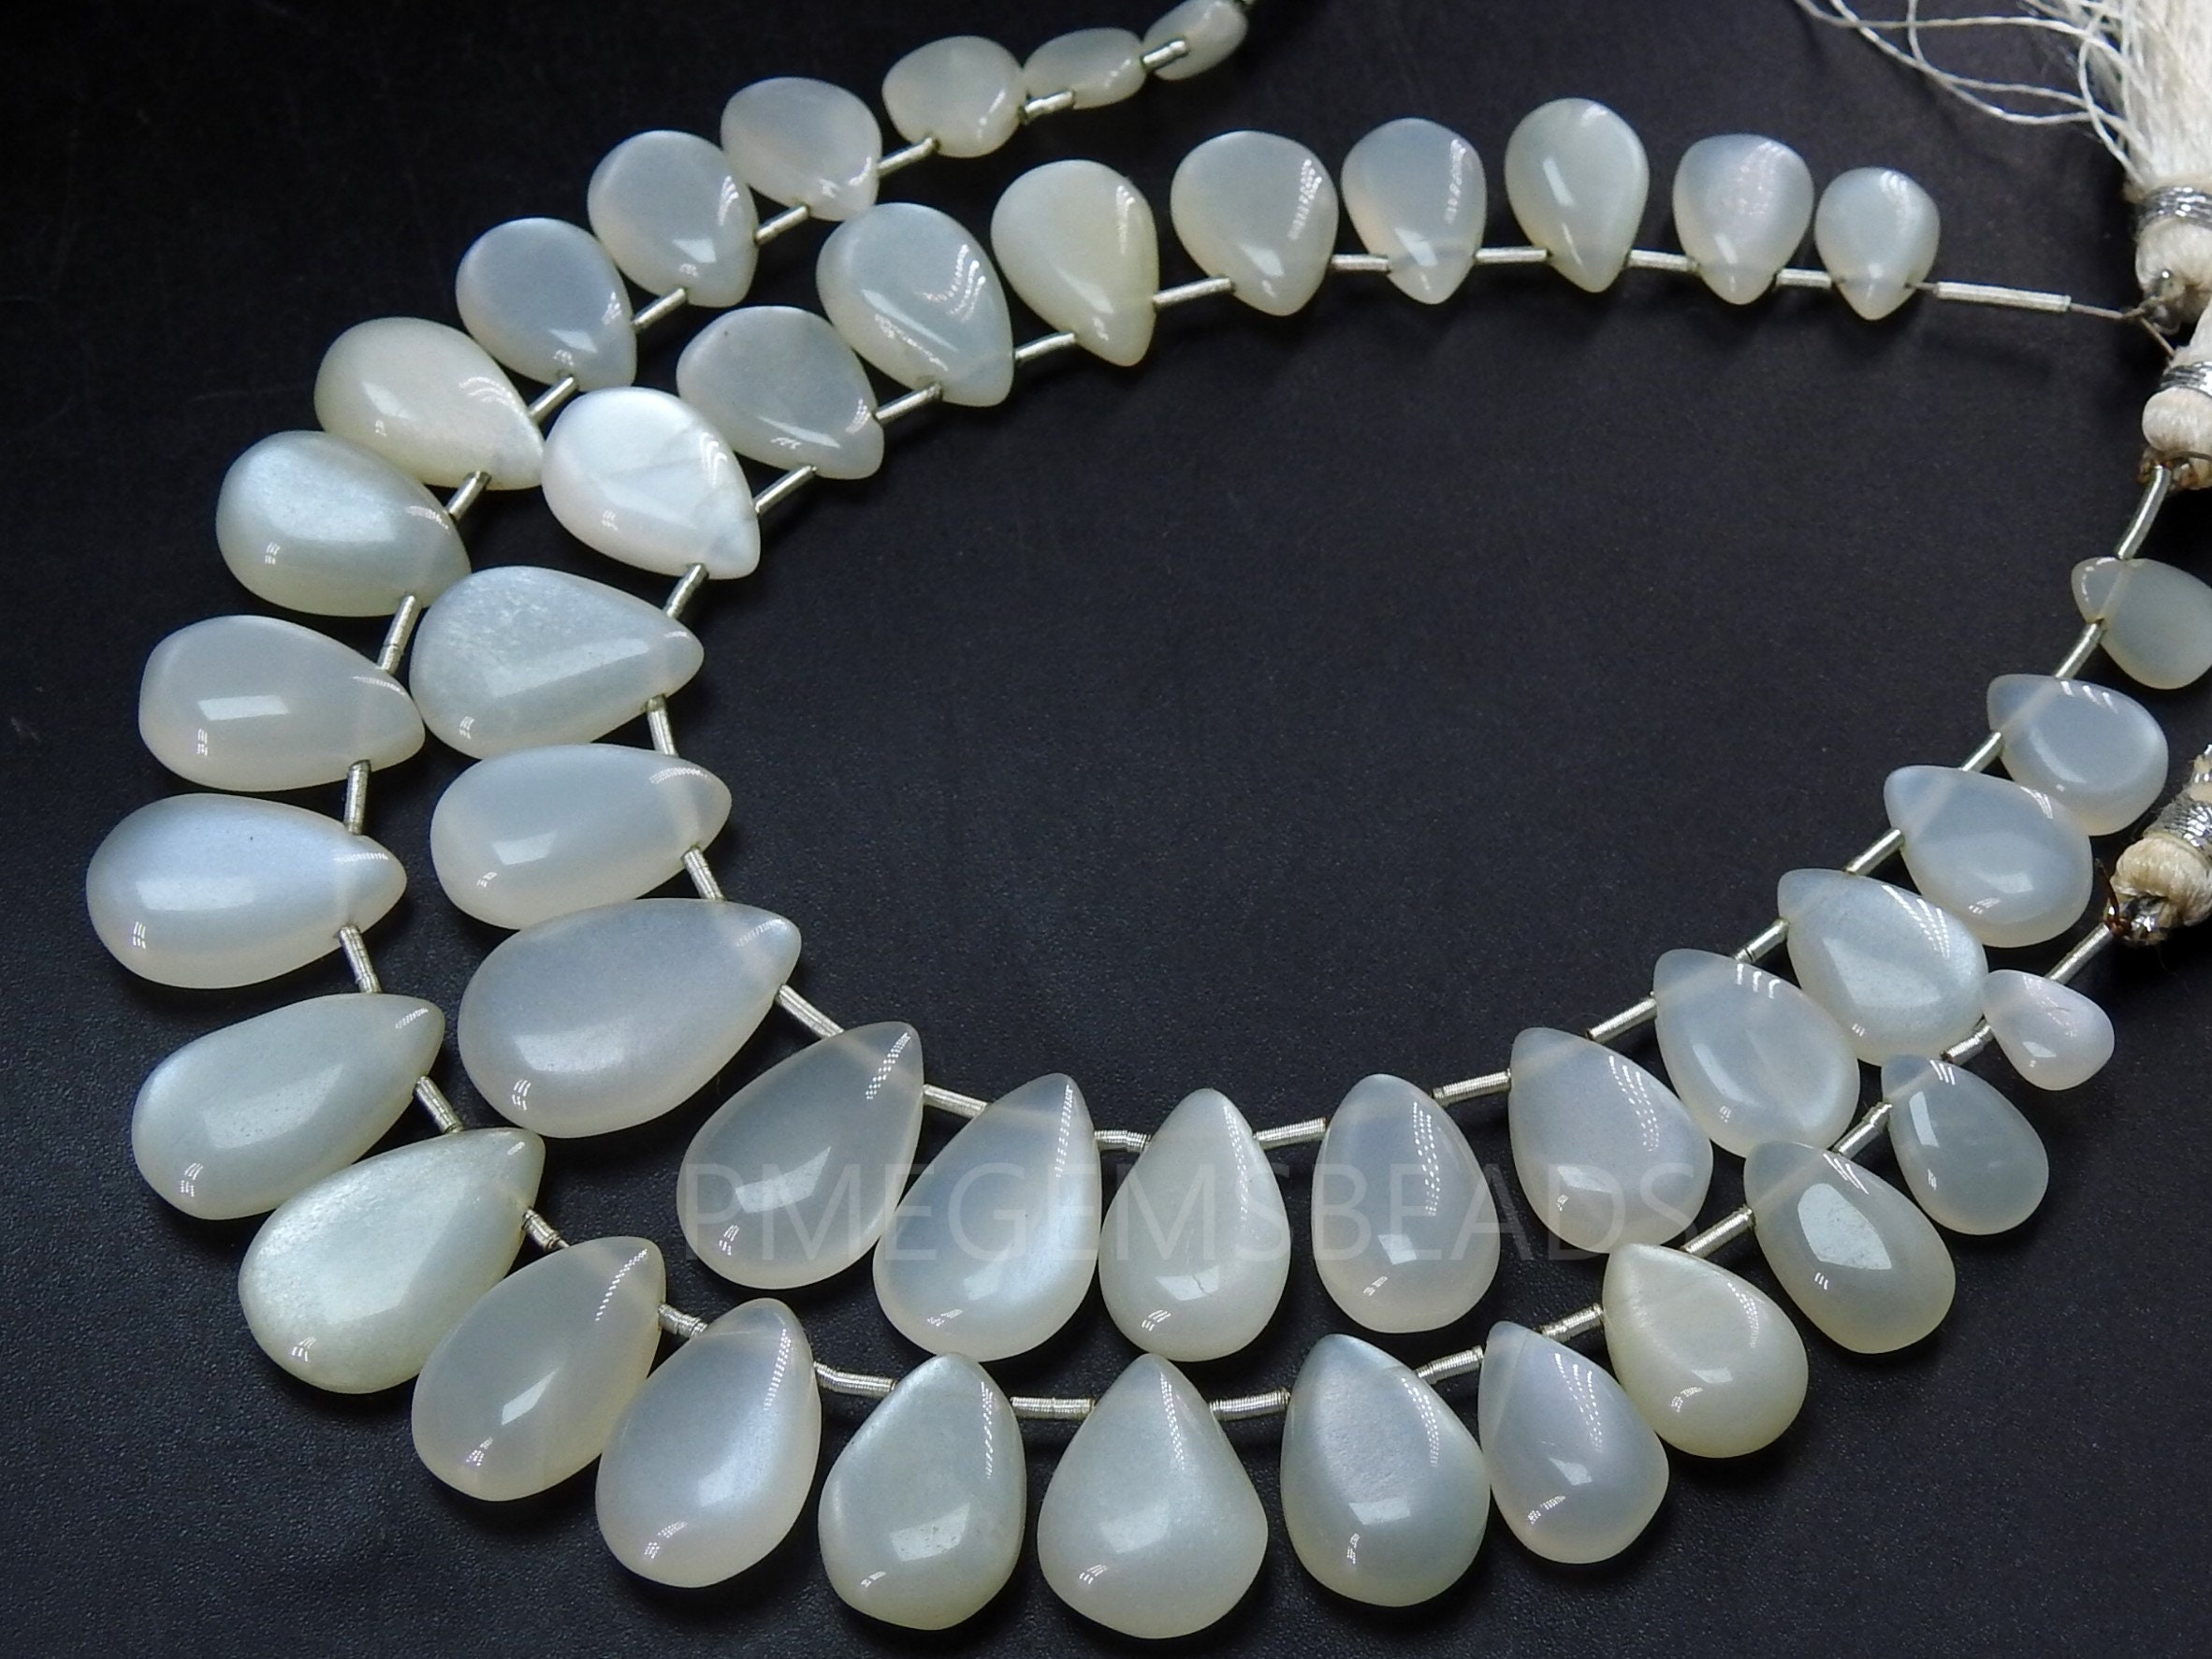 White Moonstone Smooth Teardrop,Drop,Loose Stone,Handmade Bead,For Making Jewelry,Wholesaler,Supplies,7Inchs 15X10To9X6MM Approx,PME-BR2 | Save 33% - Rajasthan Living 10